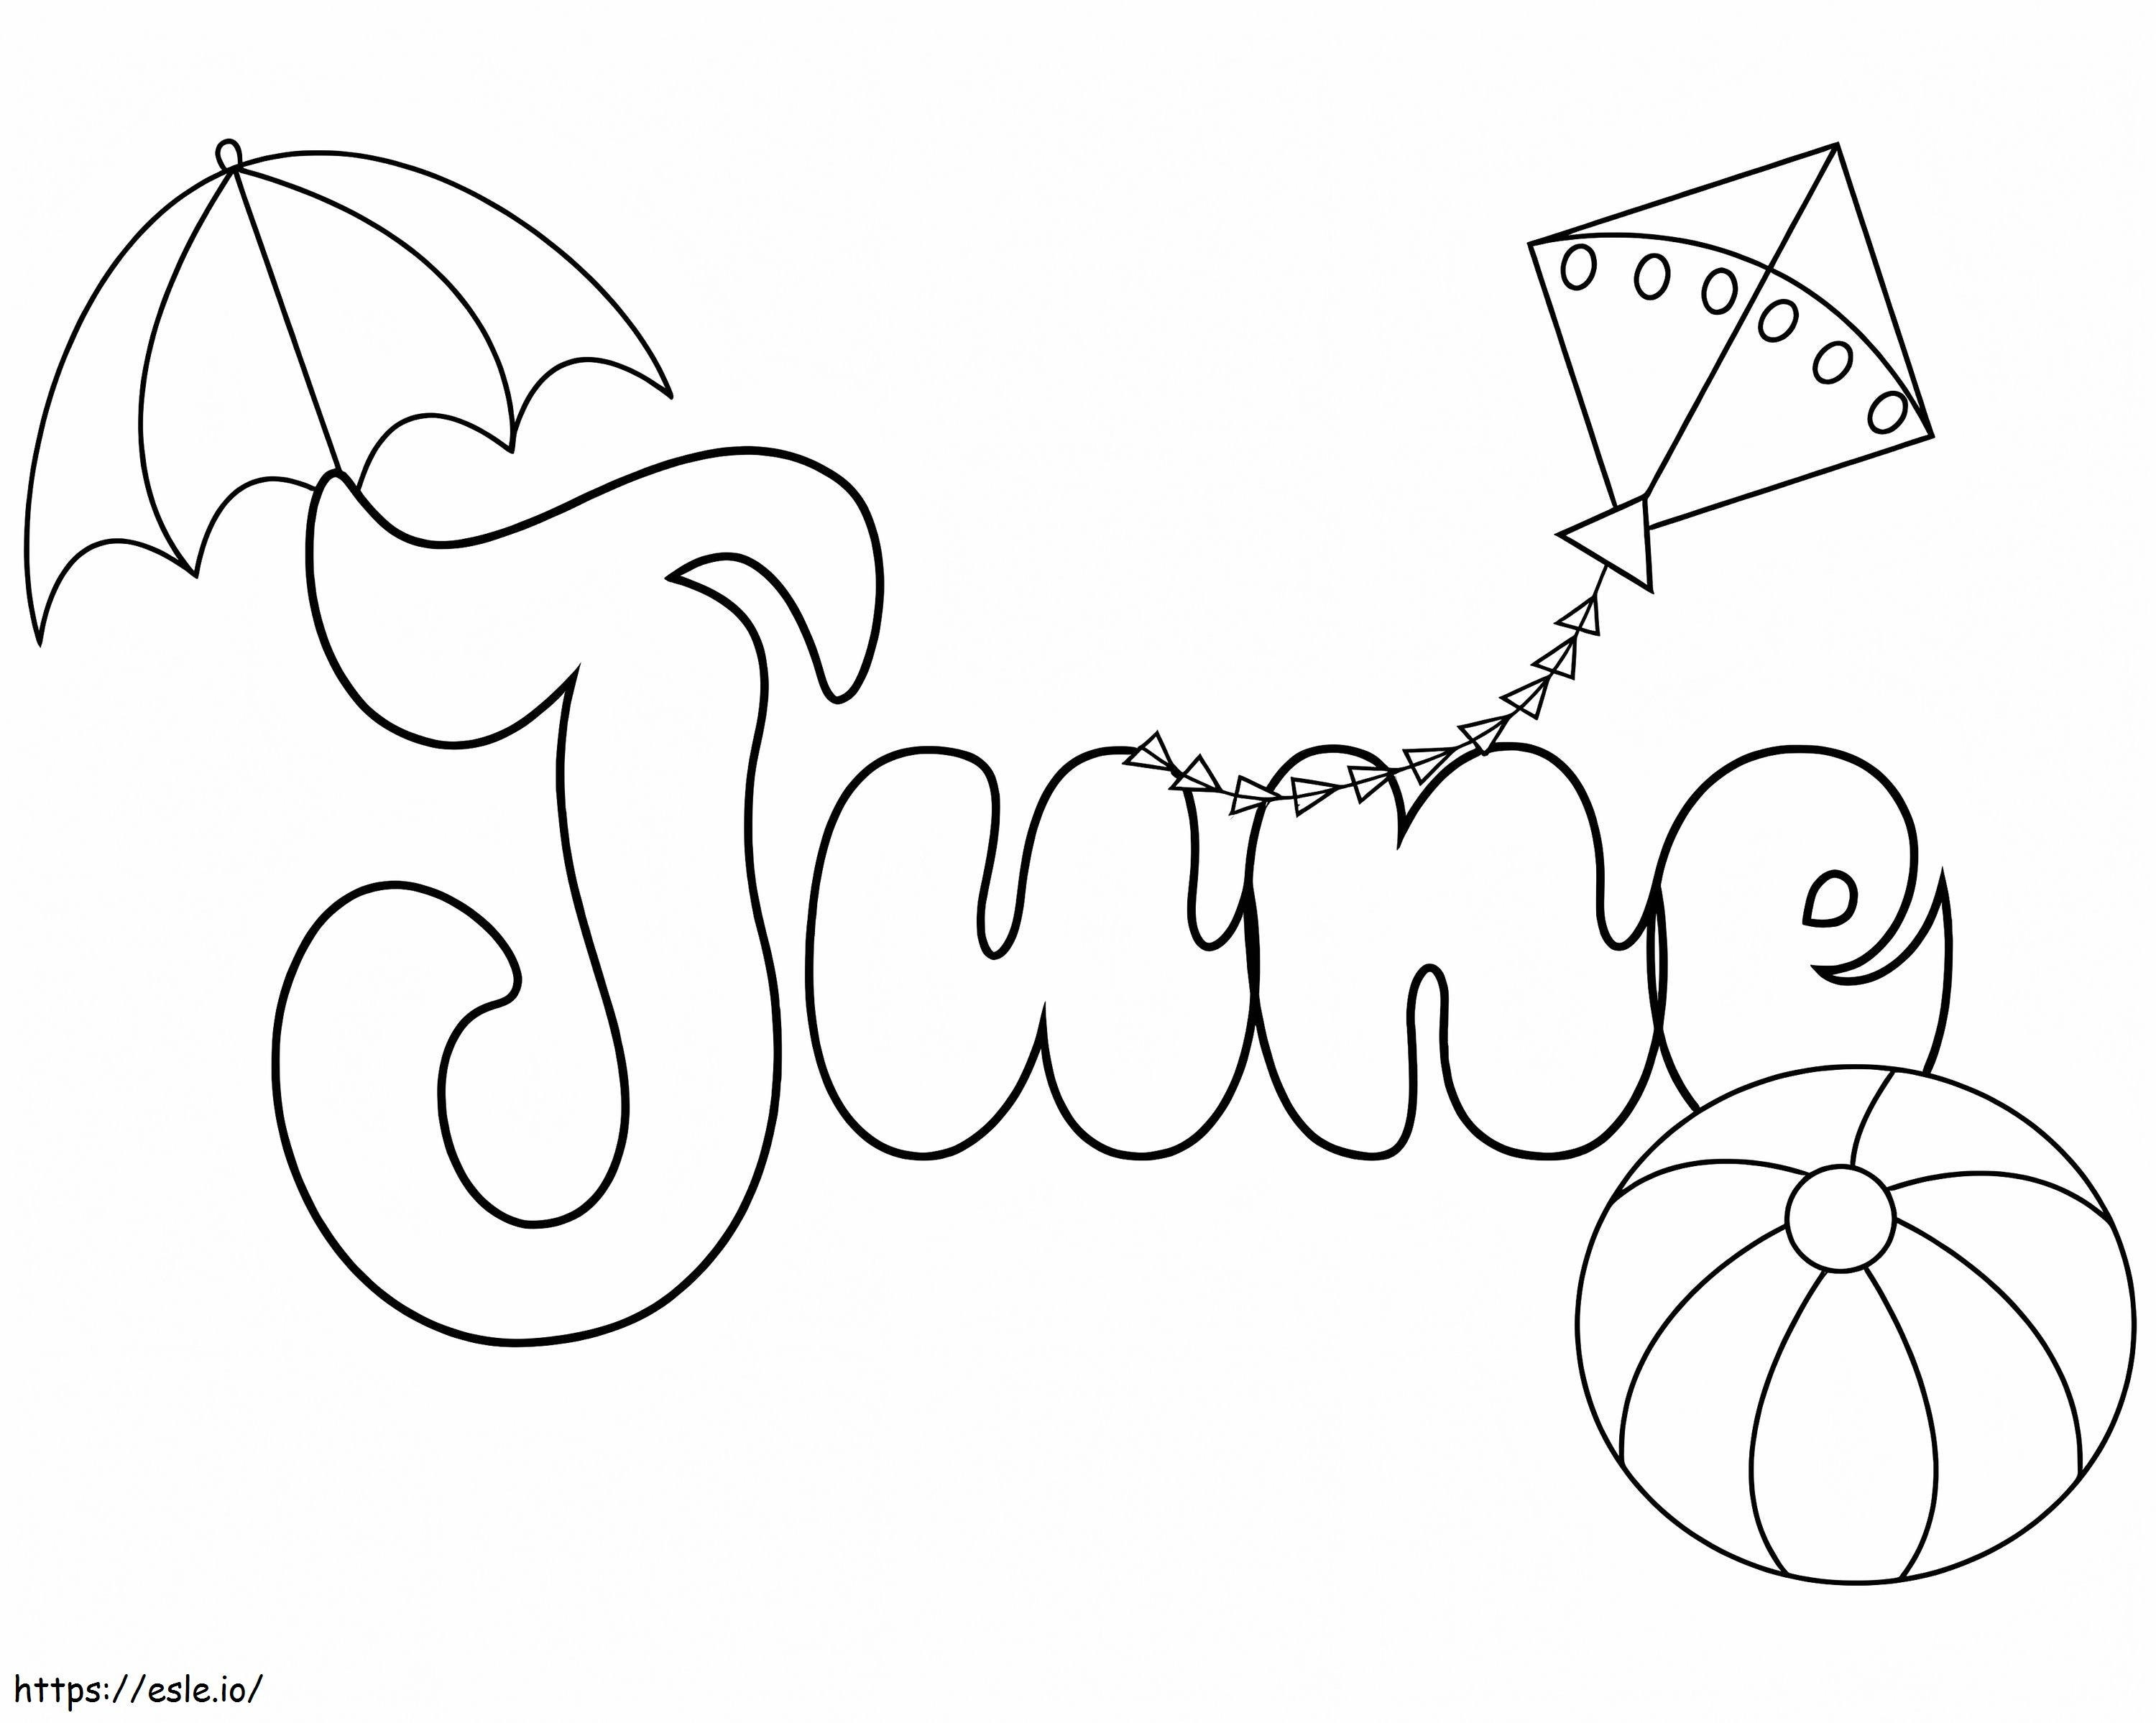 3 Of June coloring page